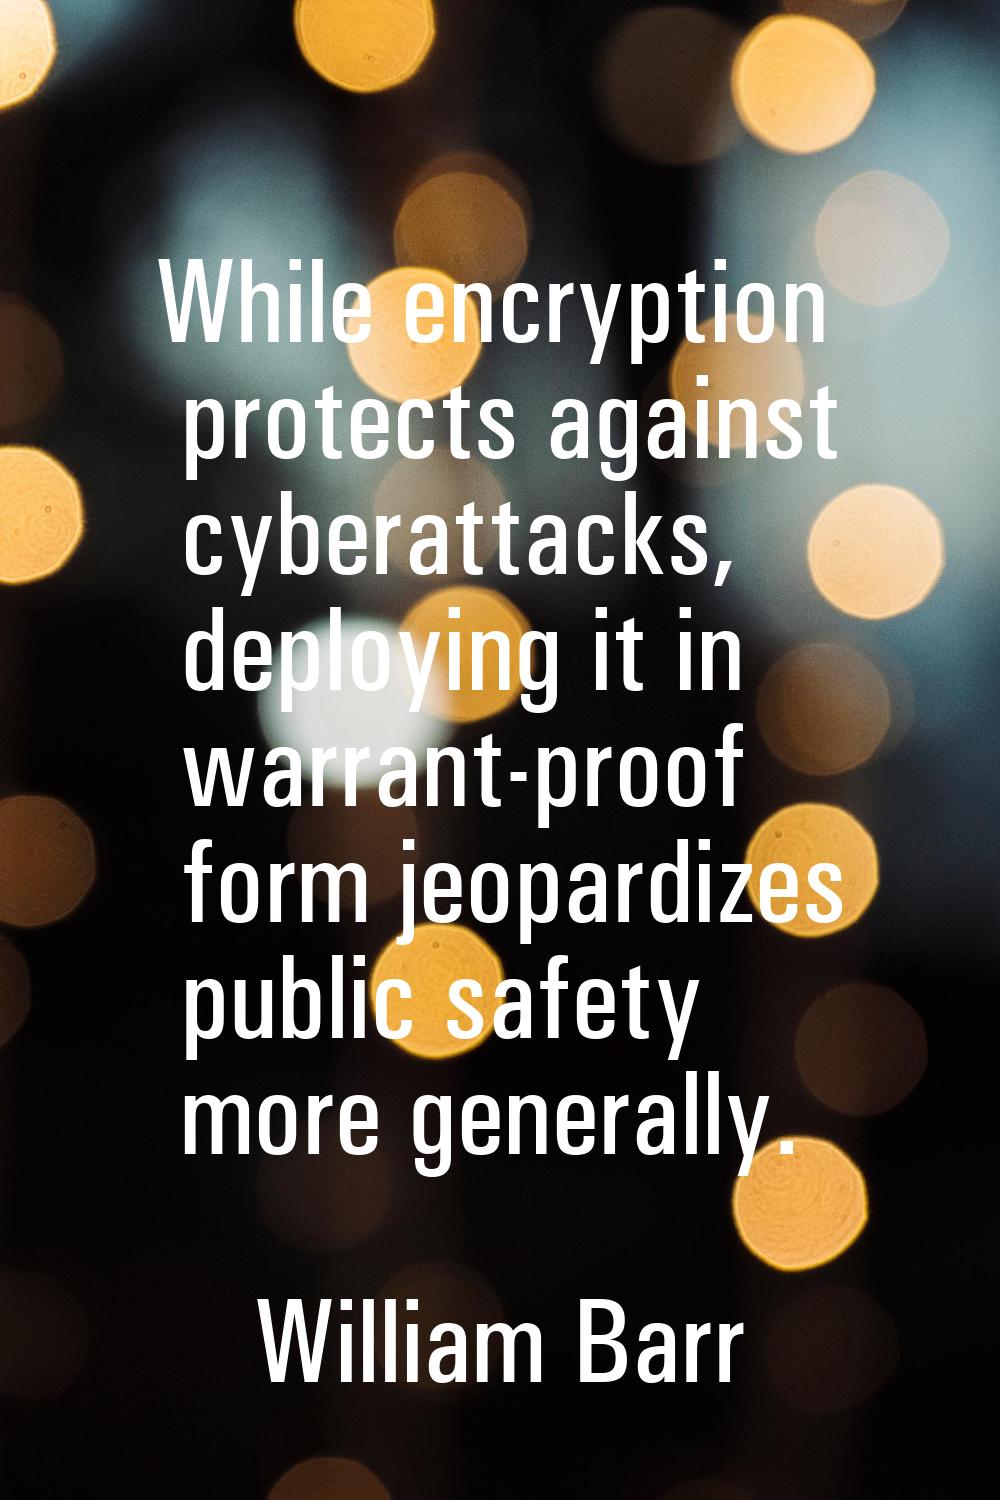 While encryption protects against cyberattacks, deploying it in warrant-proof form jeopardizes publ